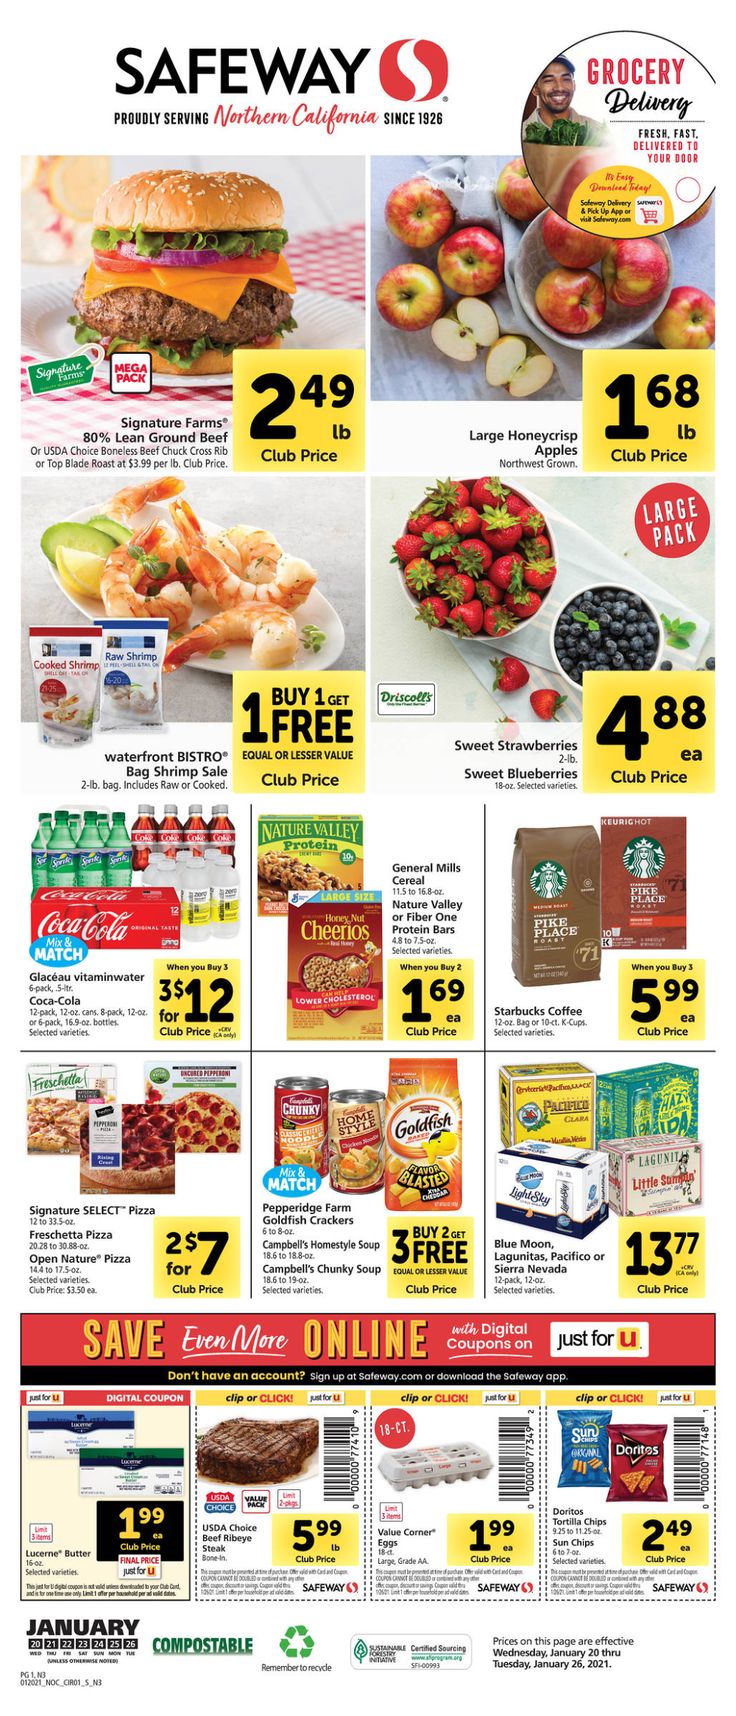 Browse the Weekly Ad & create a shopping list from Safeway | Safeway